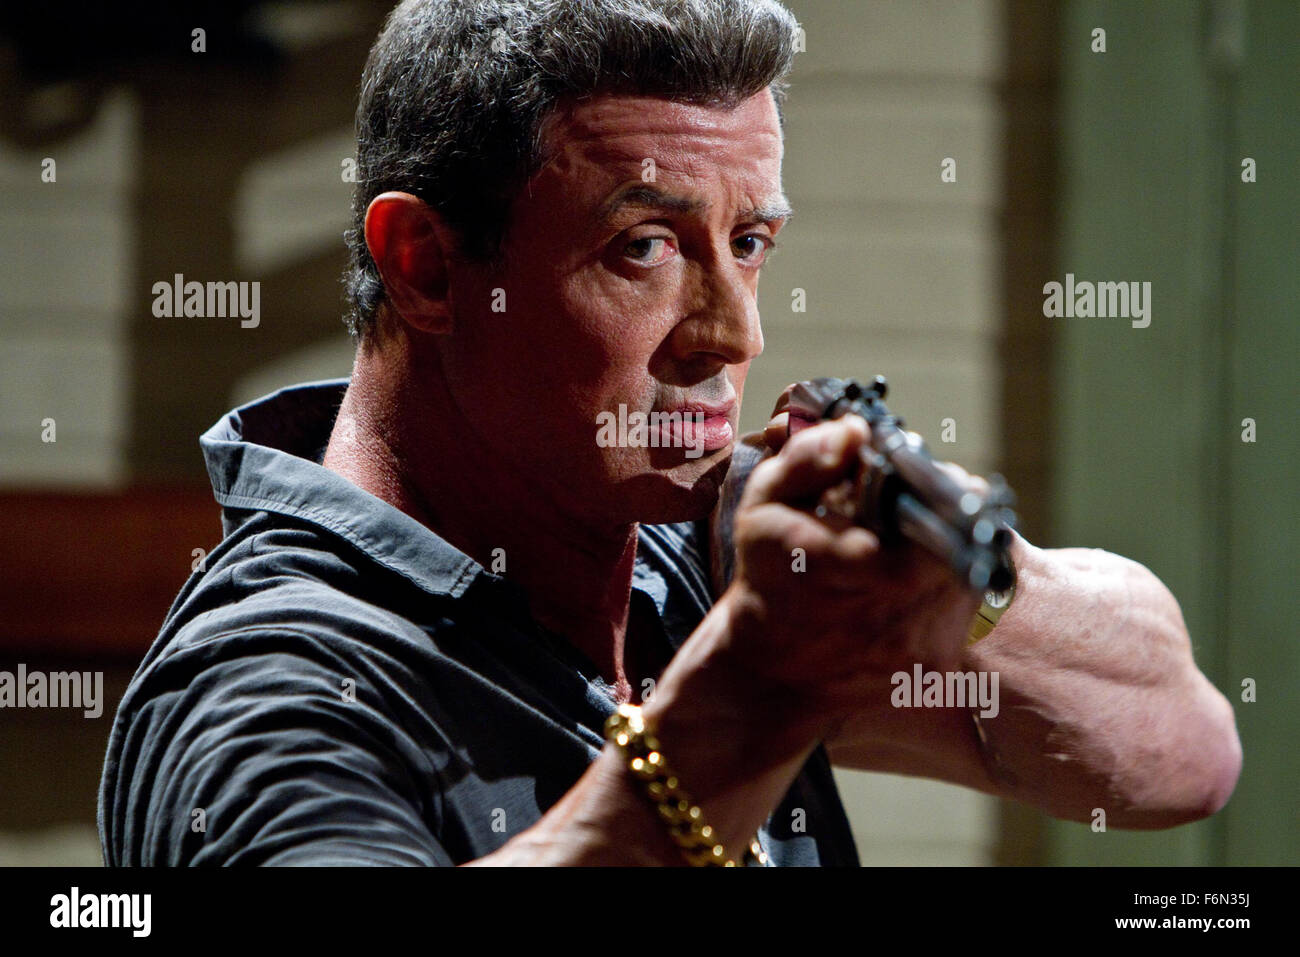 RELEASE DATE: February 1, 2013 TITLE: Bullet To The Head aka Shootout STUDIO: Dark Castle Entertainment DIRECTOR: Walter Hill PLOT: After watching their respective partners die, a New Orleans hitman and a Washington D.C. detective form an alliance in order to bring down their common enemy PICTURED: SYLVESTER STALLONE as Jimmy Bobo (Credit: c Dark Castle Entertainment/Entertainment Pictures) Stock Photo